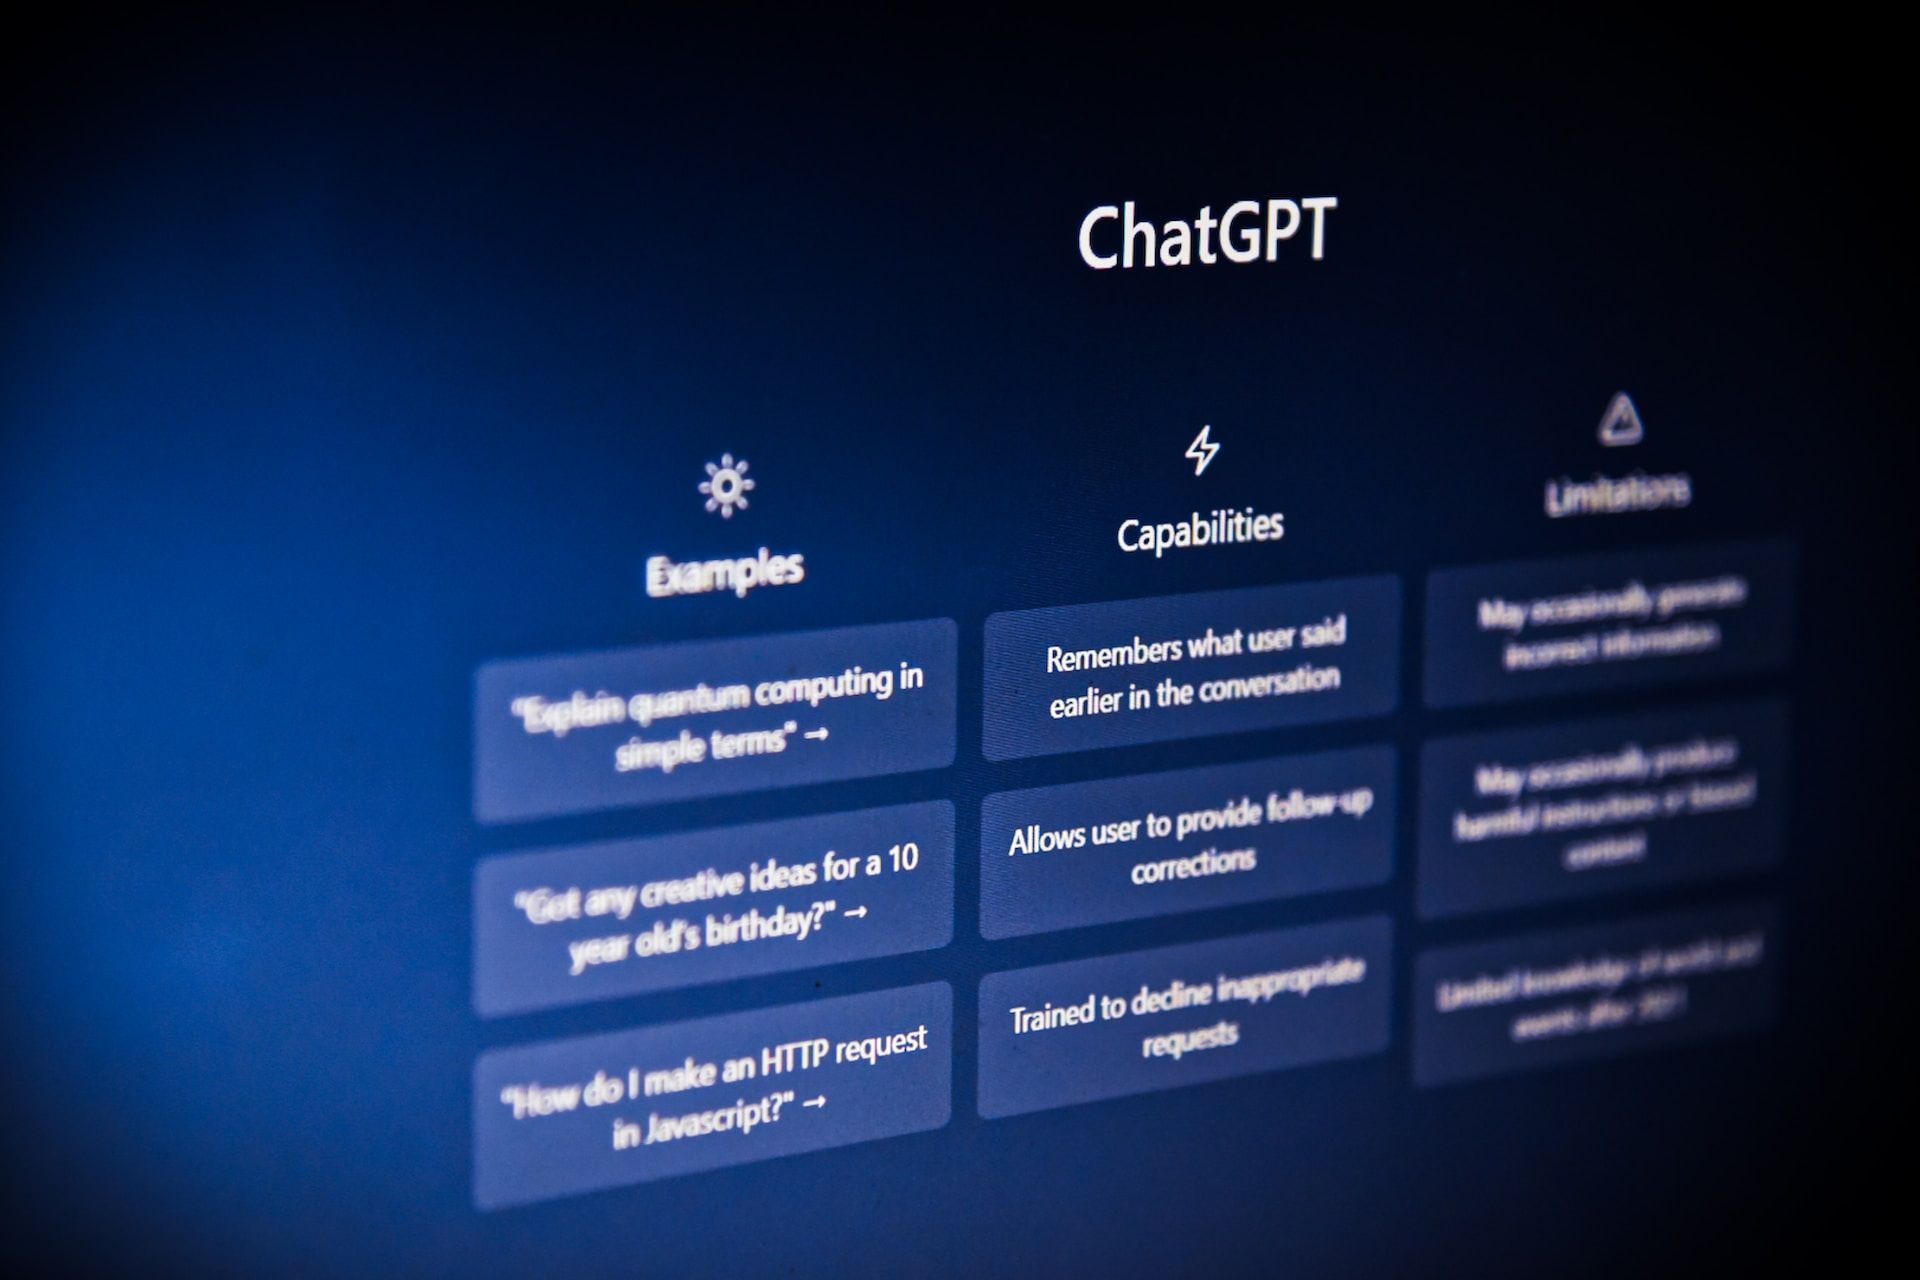 How to create your own ChatGPT bot 